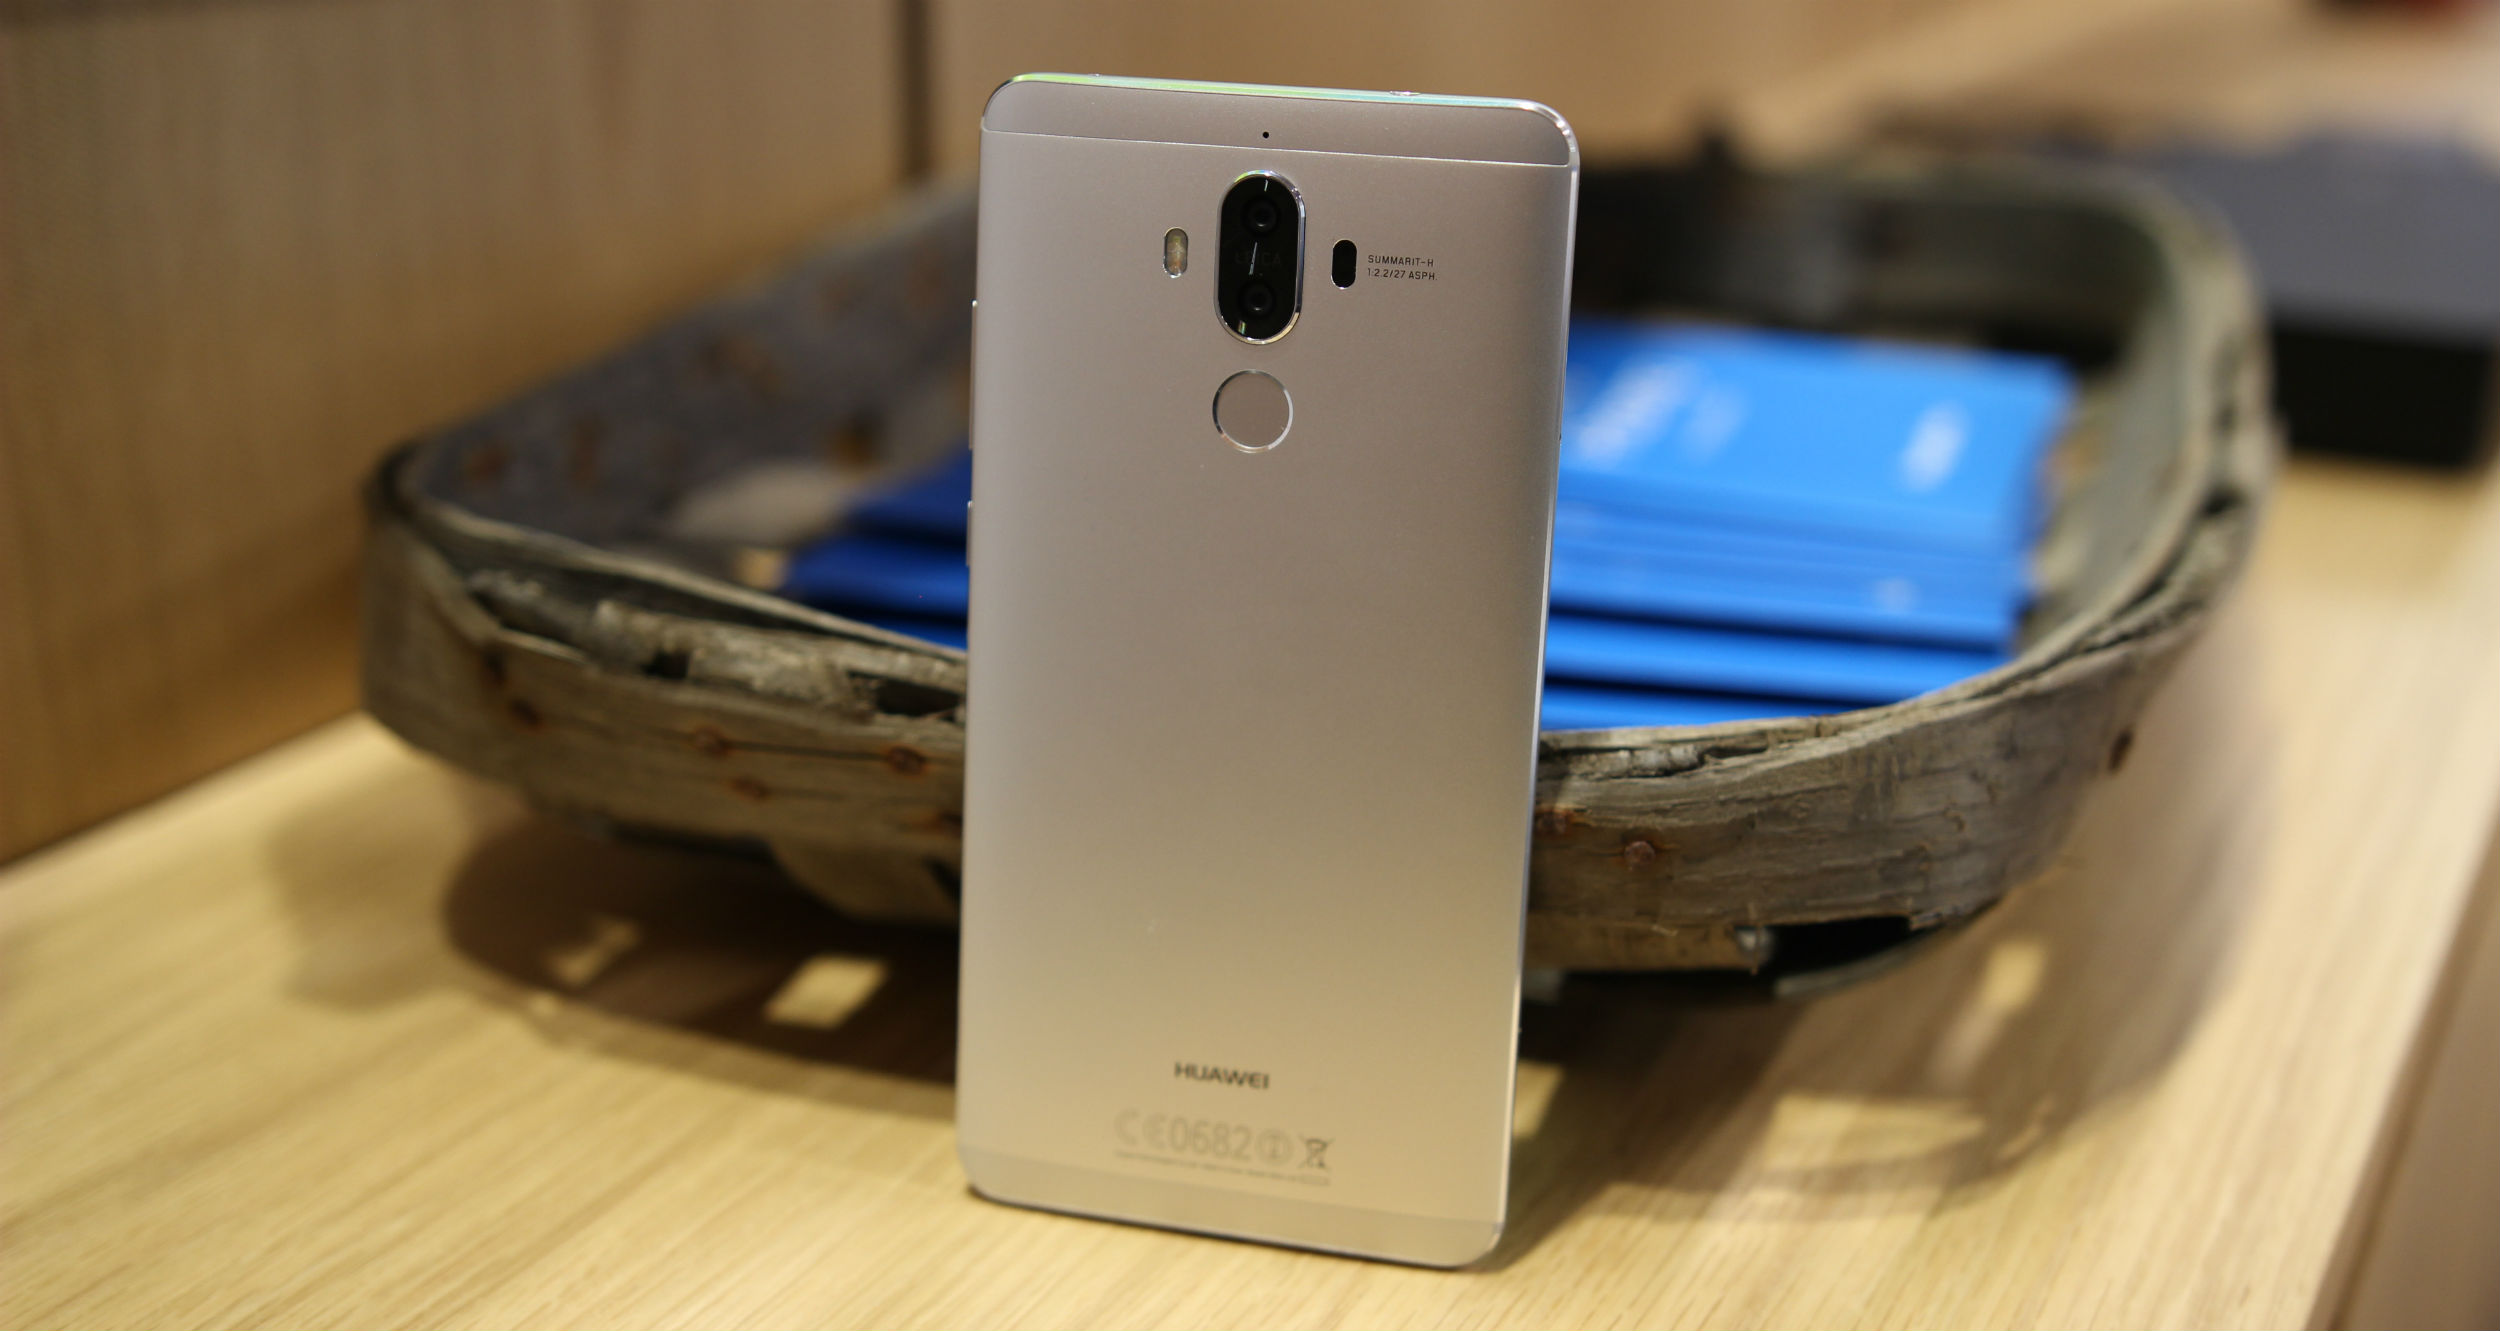 which-arm-based-soc-powers-the-huawei-mate-9